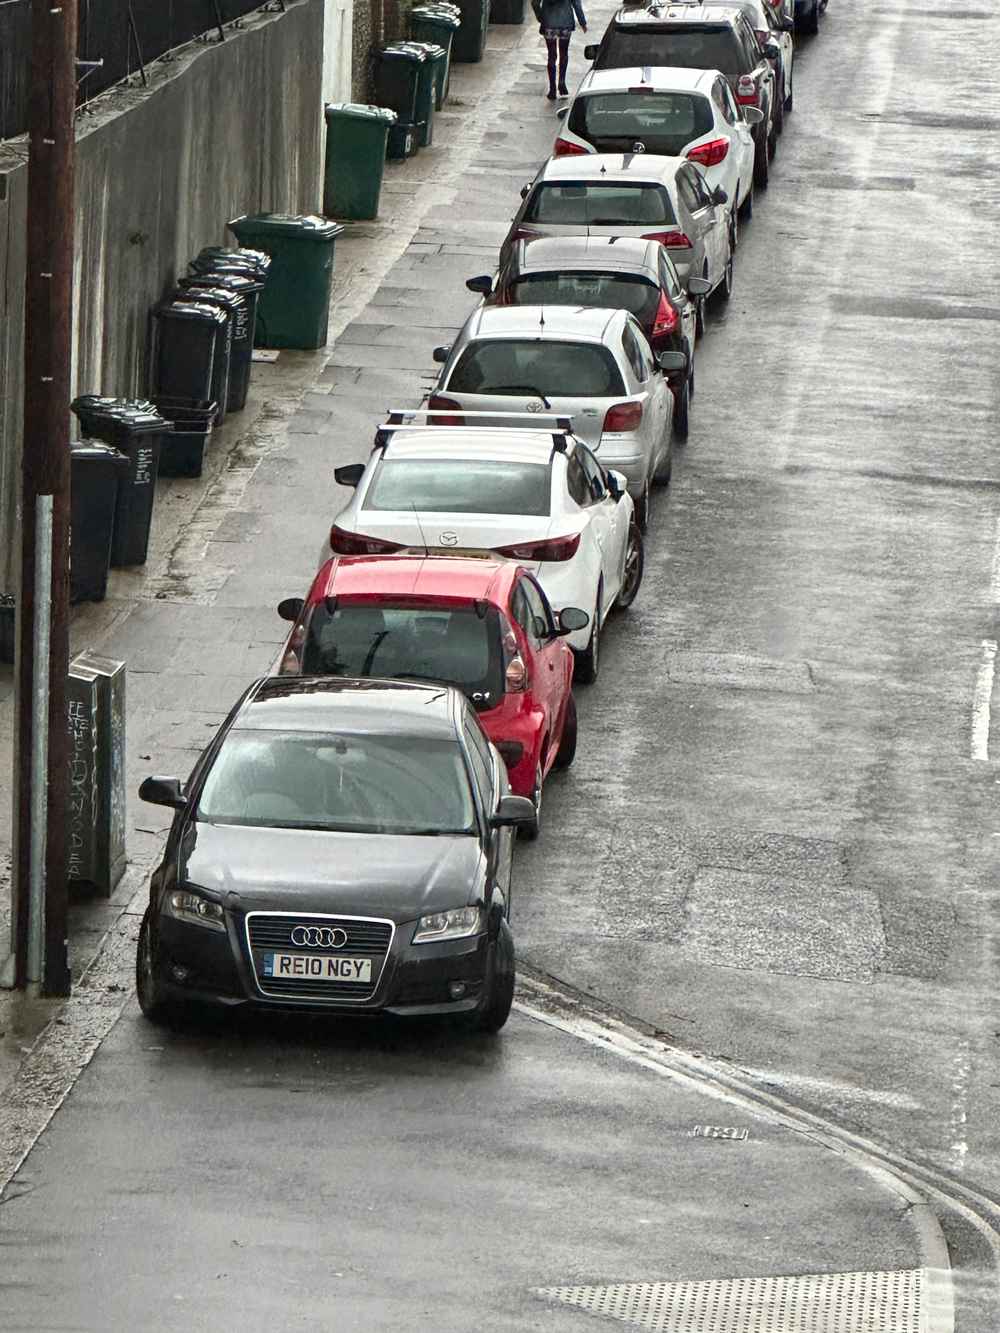 Photograph of RE10 NGY - a Black Audi A3 parked in Hollingdean by a non-resident who uses the local area as part of their Brighton commute. The third of four photographs supplied by the residents of Hollingdean.